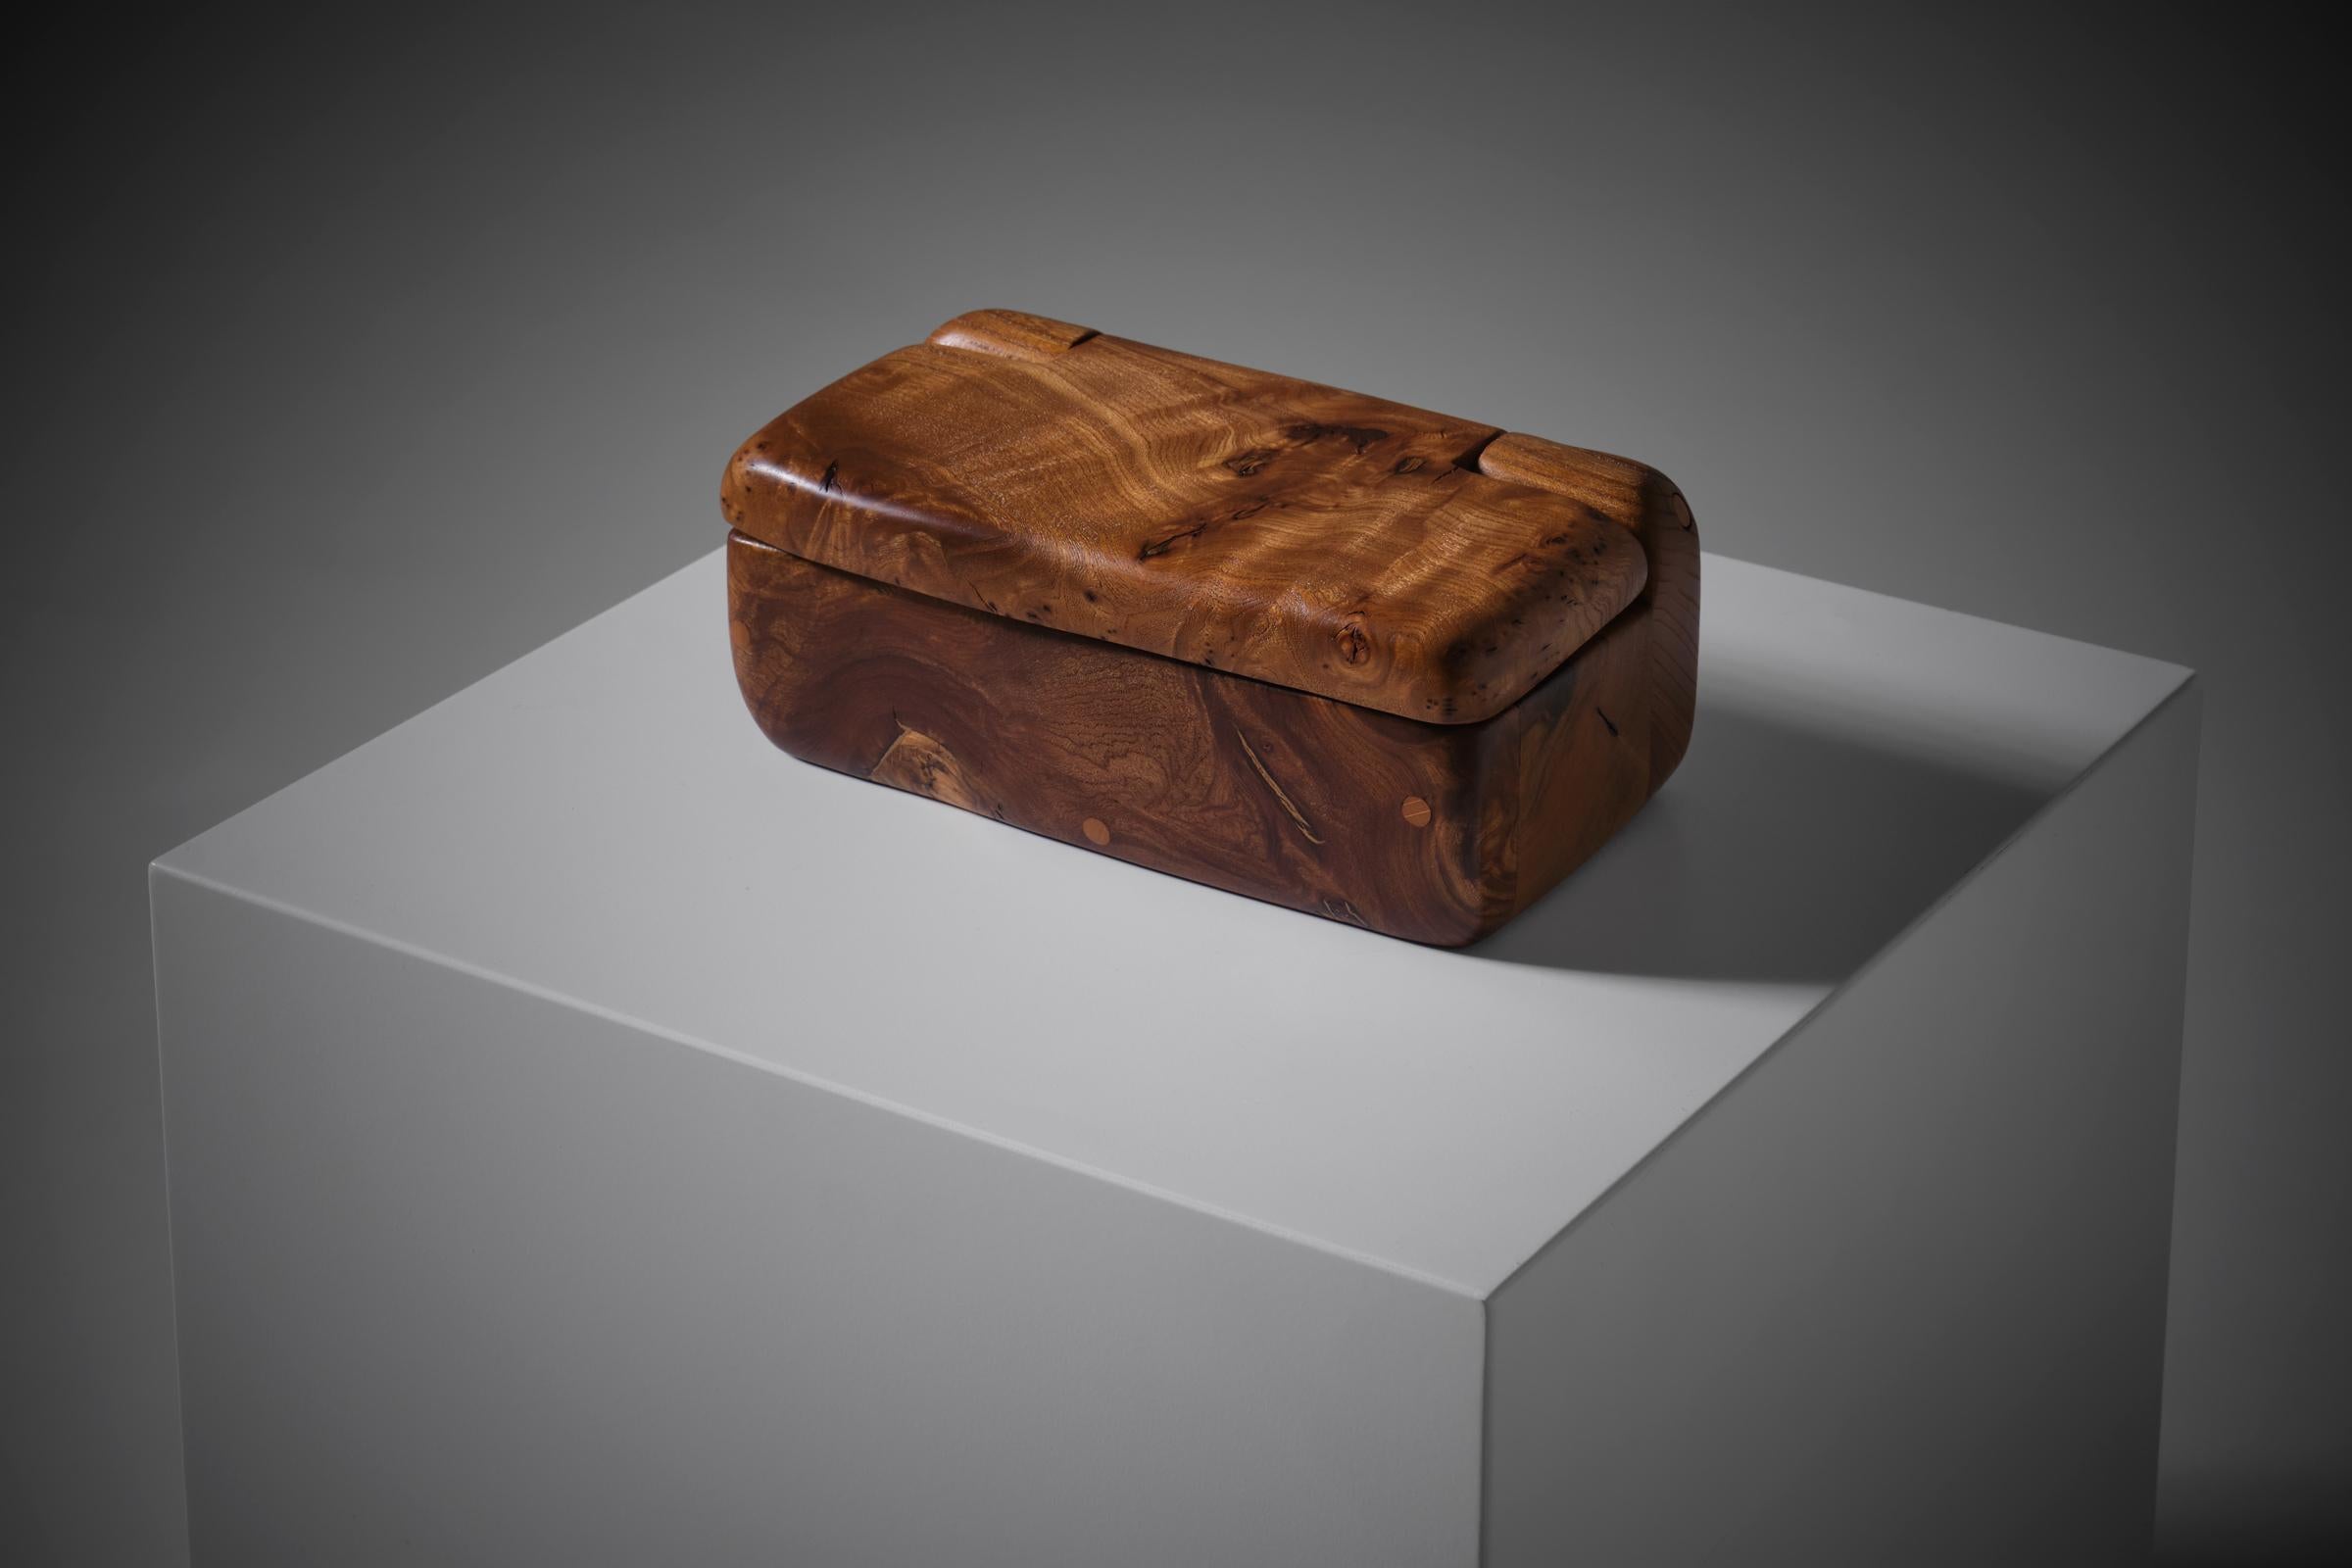 Sculptural wooden box, France 1970s. The box is hand carved out of beautiful solid Olive wood. Beautiful bold shapes, crafted with a great feeling and technique. Decorative object in excellent original condition.

